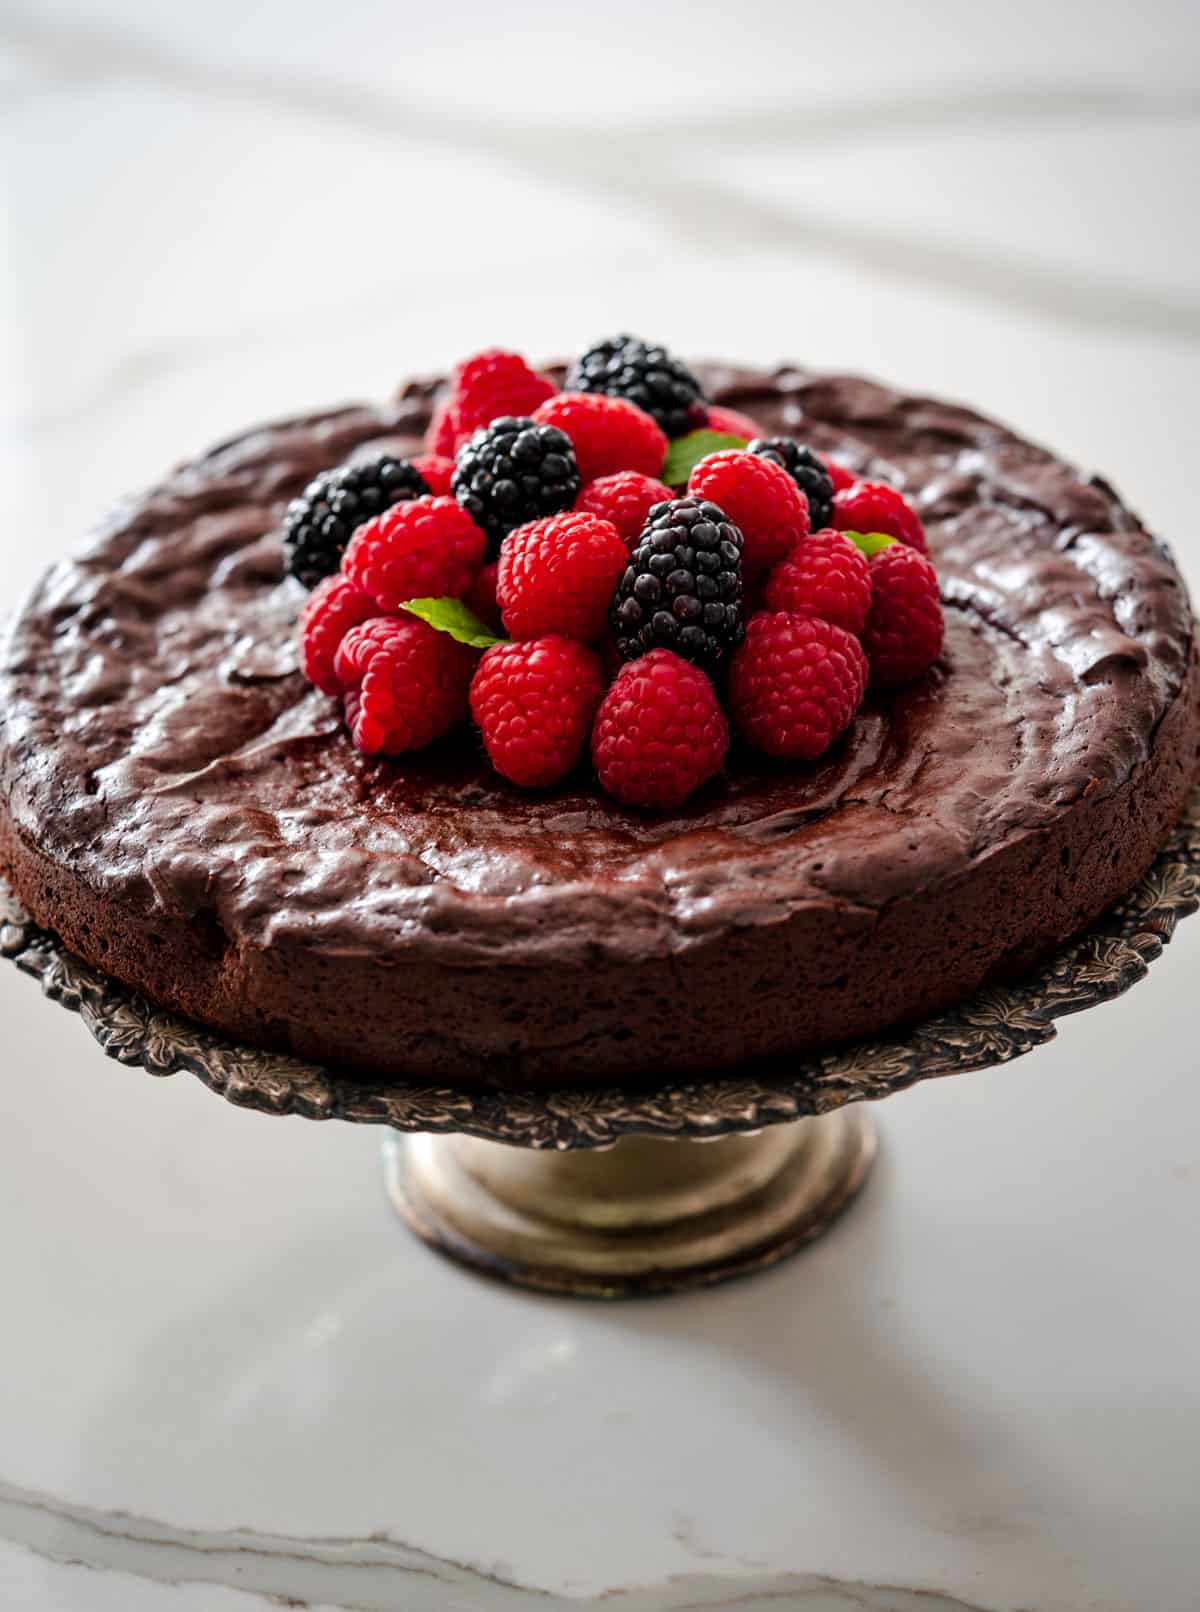 baked flourless chocolate cake on a silver cake stand with berries on top